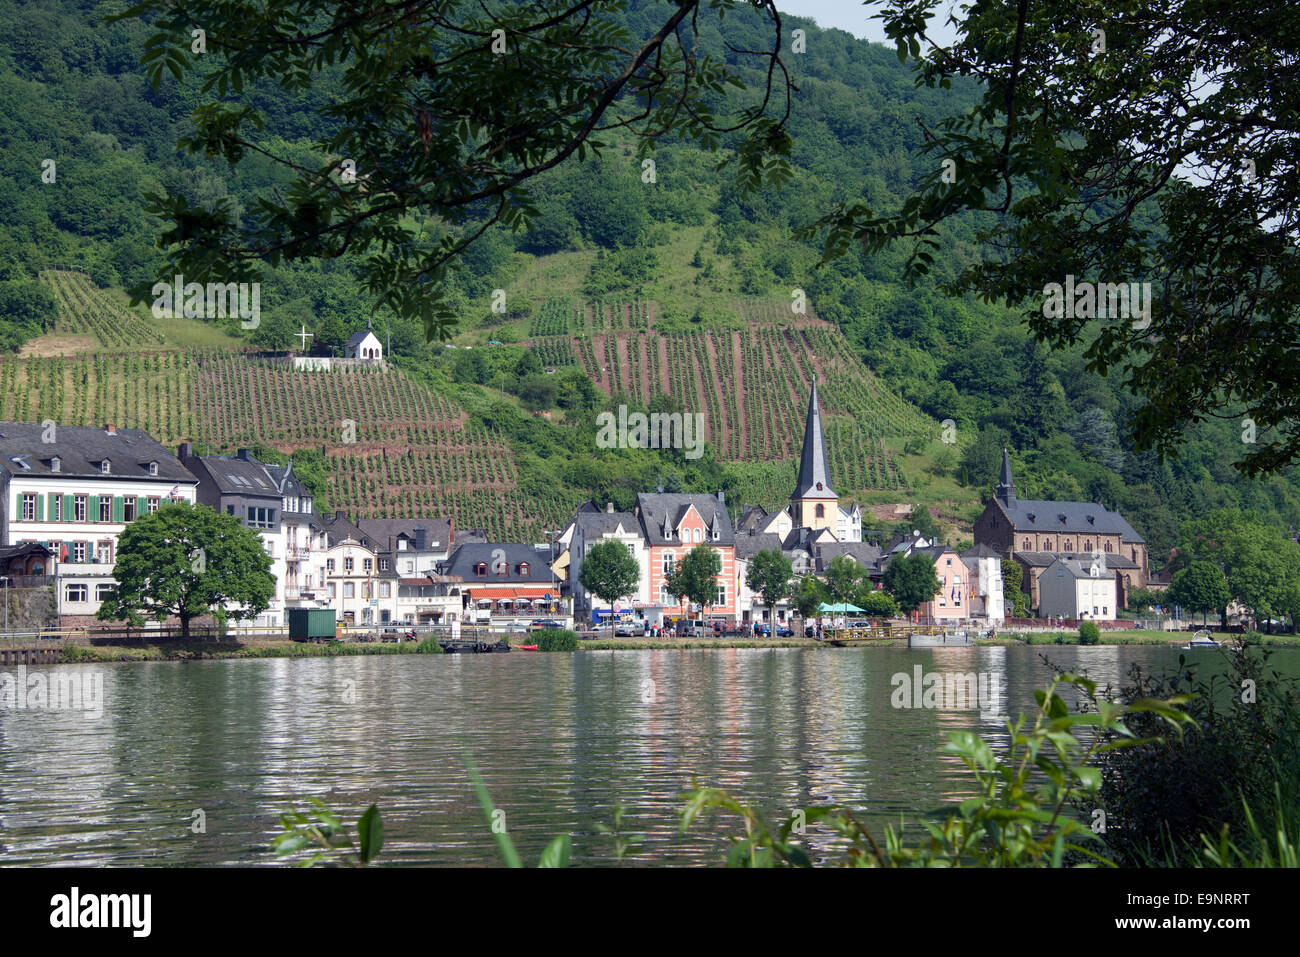 River frontage Marienburg Moselle River Moselle Valley Germany Stock Photo